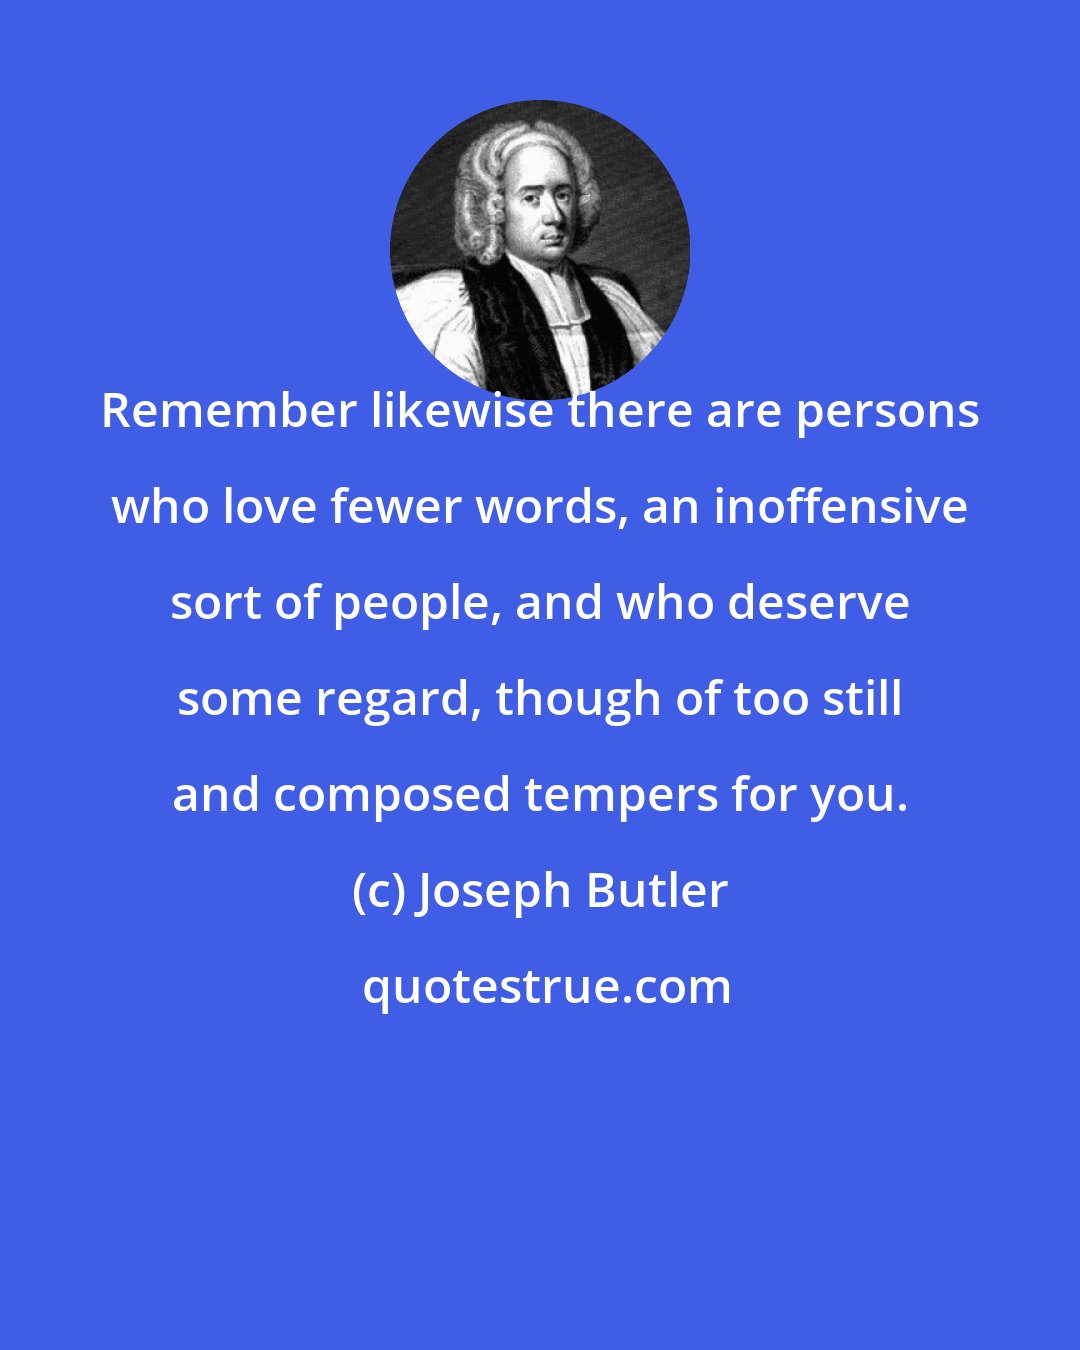 Joseph Butler: Remember likewise there are persons who love fewer words, an inoffensive sort of people, and who deserve some regard, though of too still and composed tempers for you.